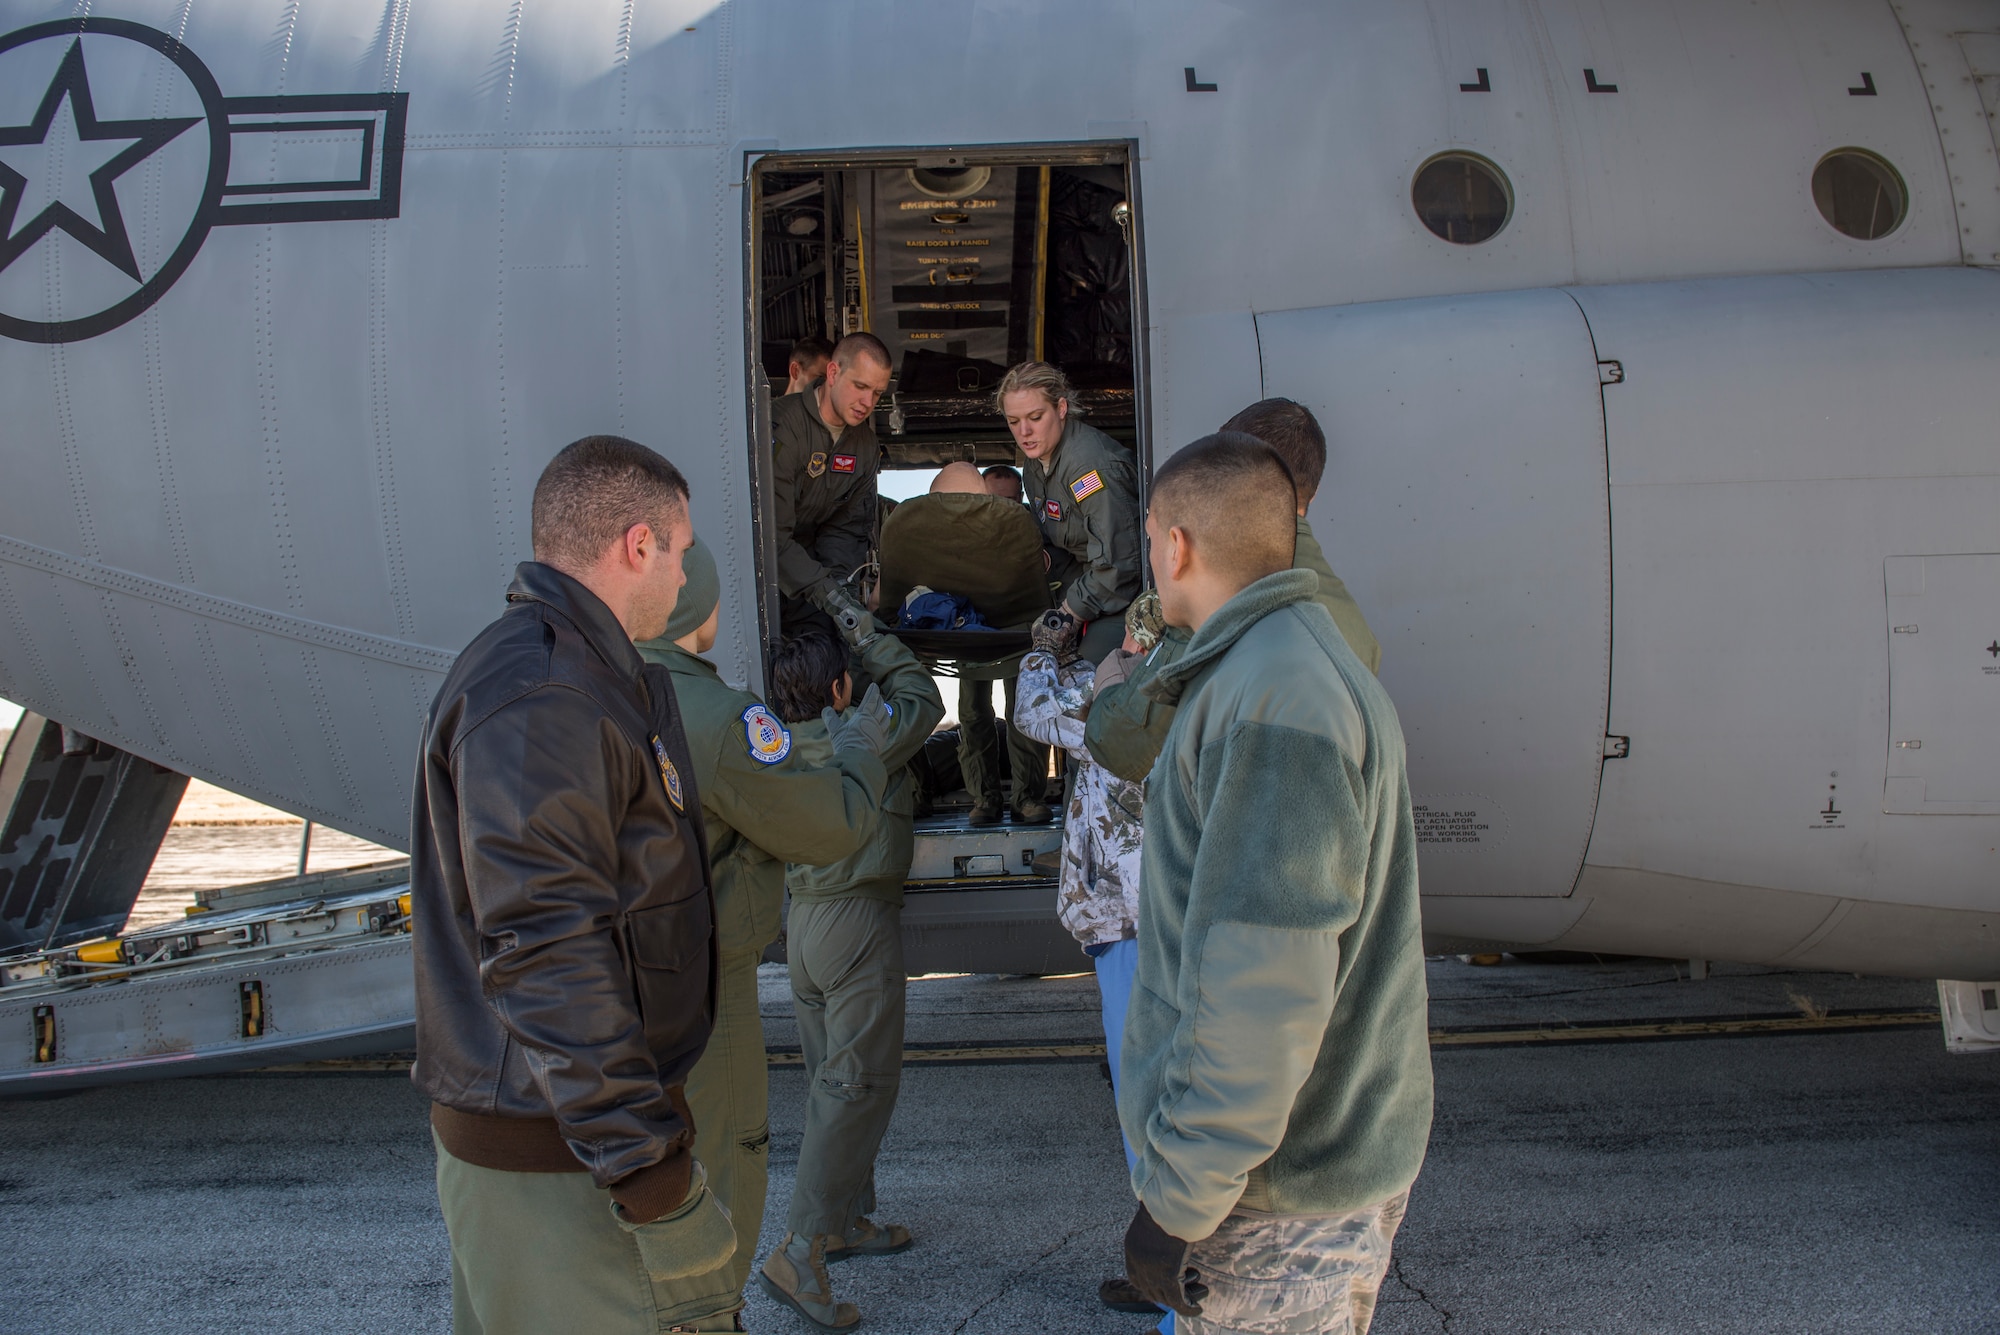 375th Aeromedical Evacuation Squadron Airmen perform emergency evacuation during training in a simulated C-130 Hercules fuselage Jan. 28, 2016, Scott Air Force Base, Illinois. The C-130 Hercules fuselage was rescued from the bone yard and is used to keep the aircrew's skills sharp. (U.S. Air Force photo by Airman 1st Class Melissa Estevez)